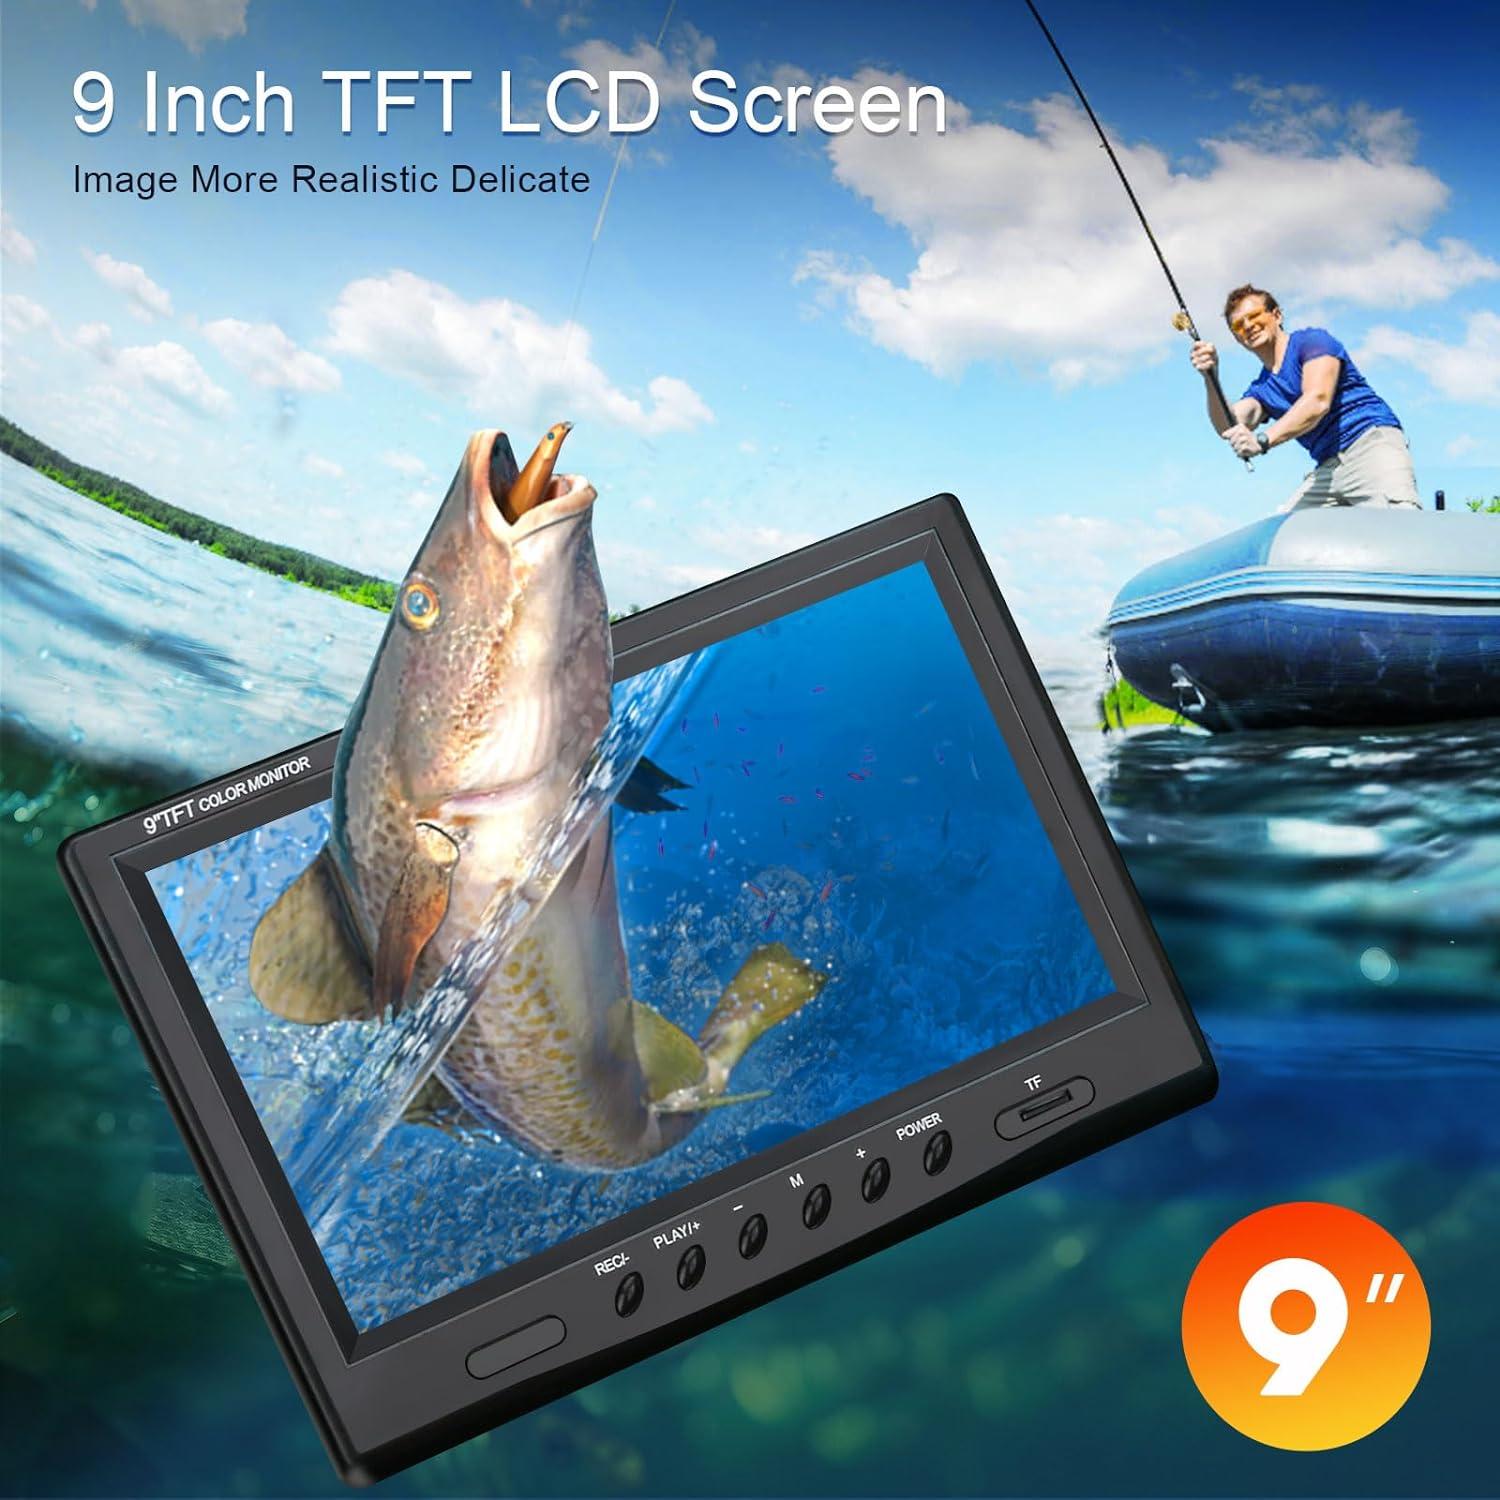 Underwater Fishing Camera for Rod with 5 Inch LCD Monitor DVR Recorder  1080P